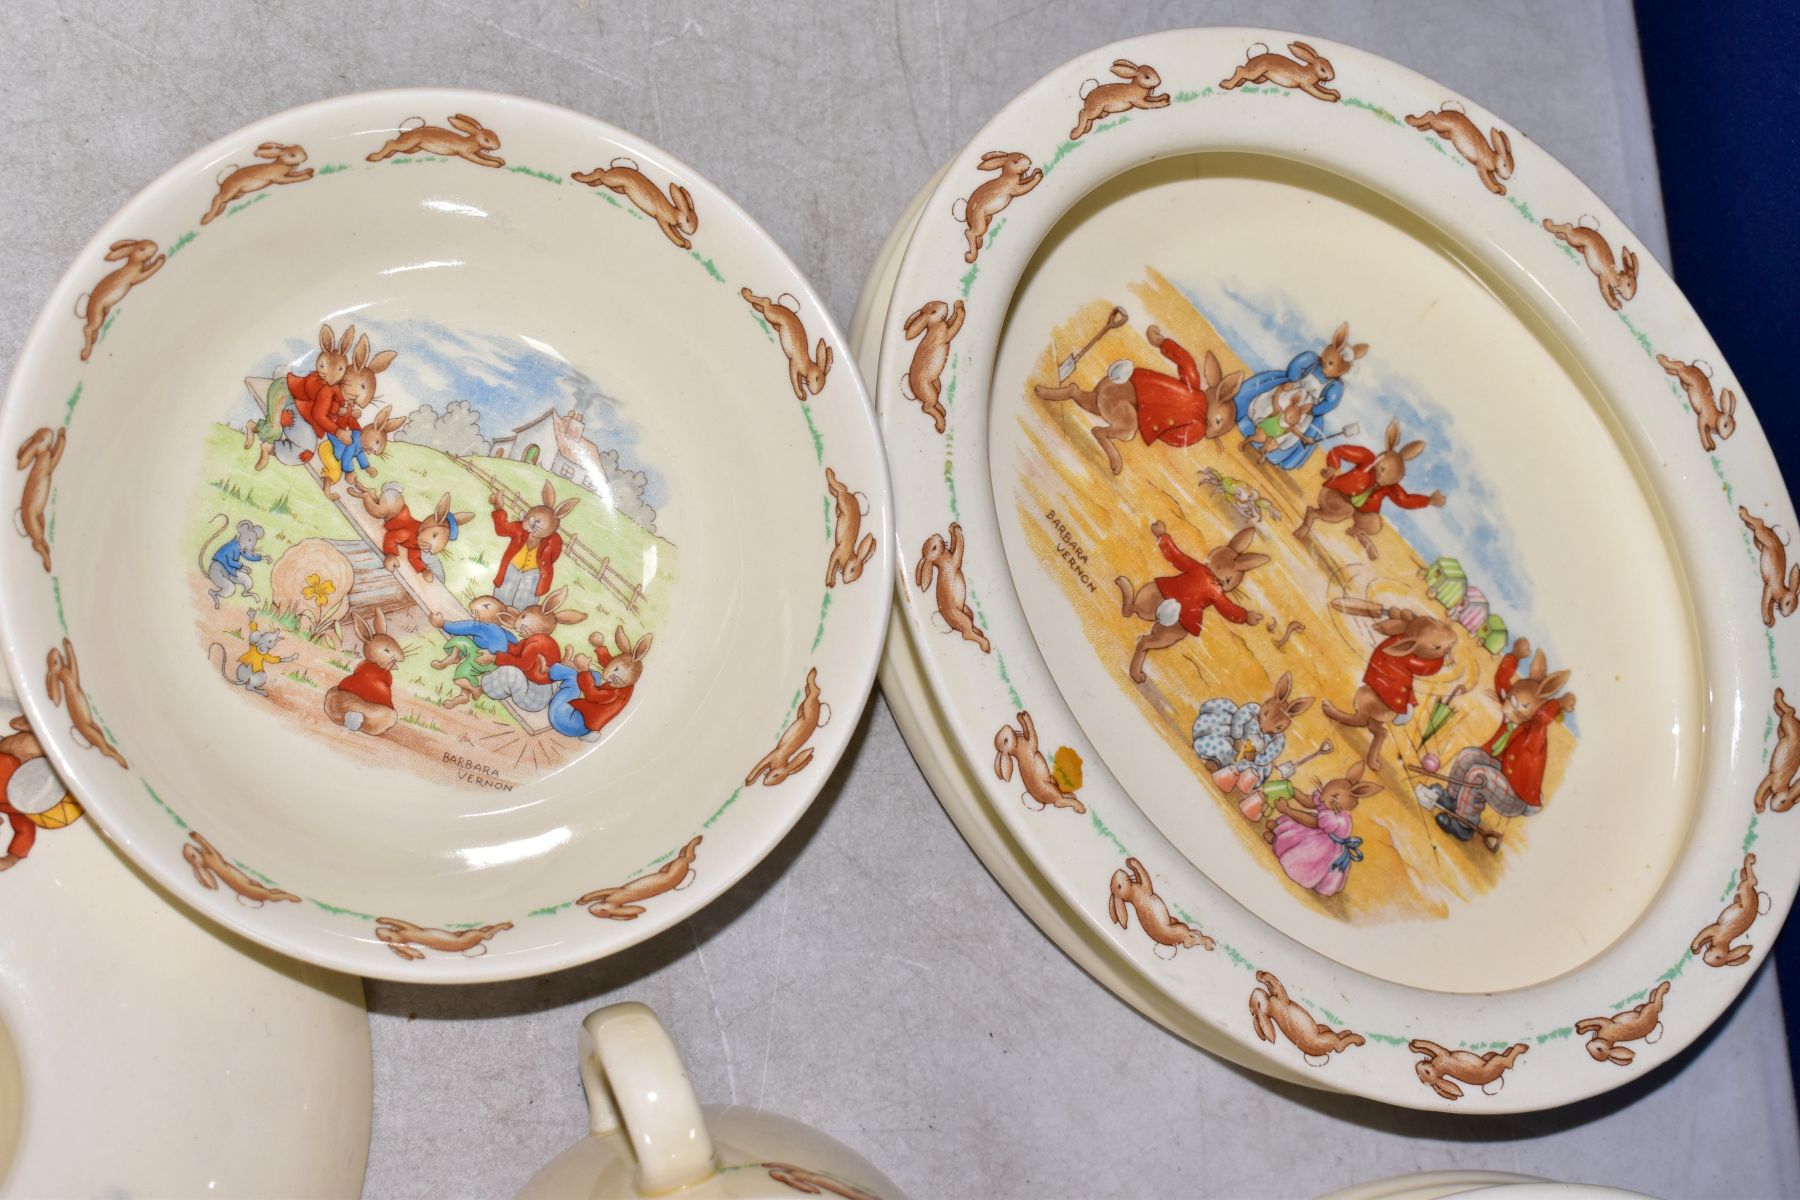 SIX PIECES OF ROYAL DOULTON BUNNYKINS EARTHENWARE TABLEWARES, DESIGNED BY BARBARA VERNON AND - Image 2 of 11